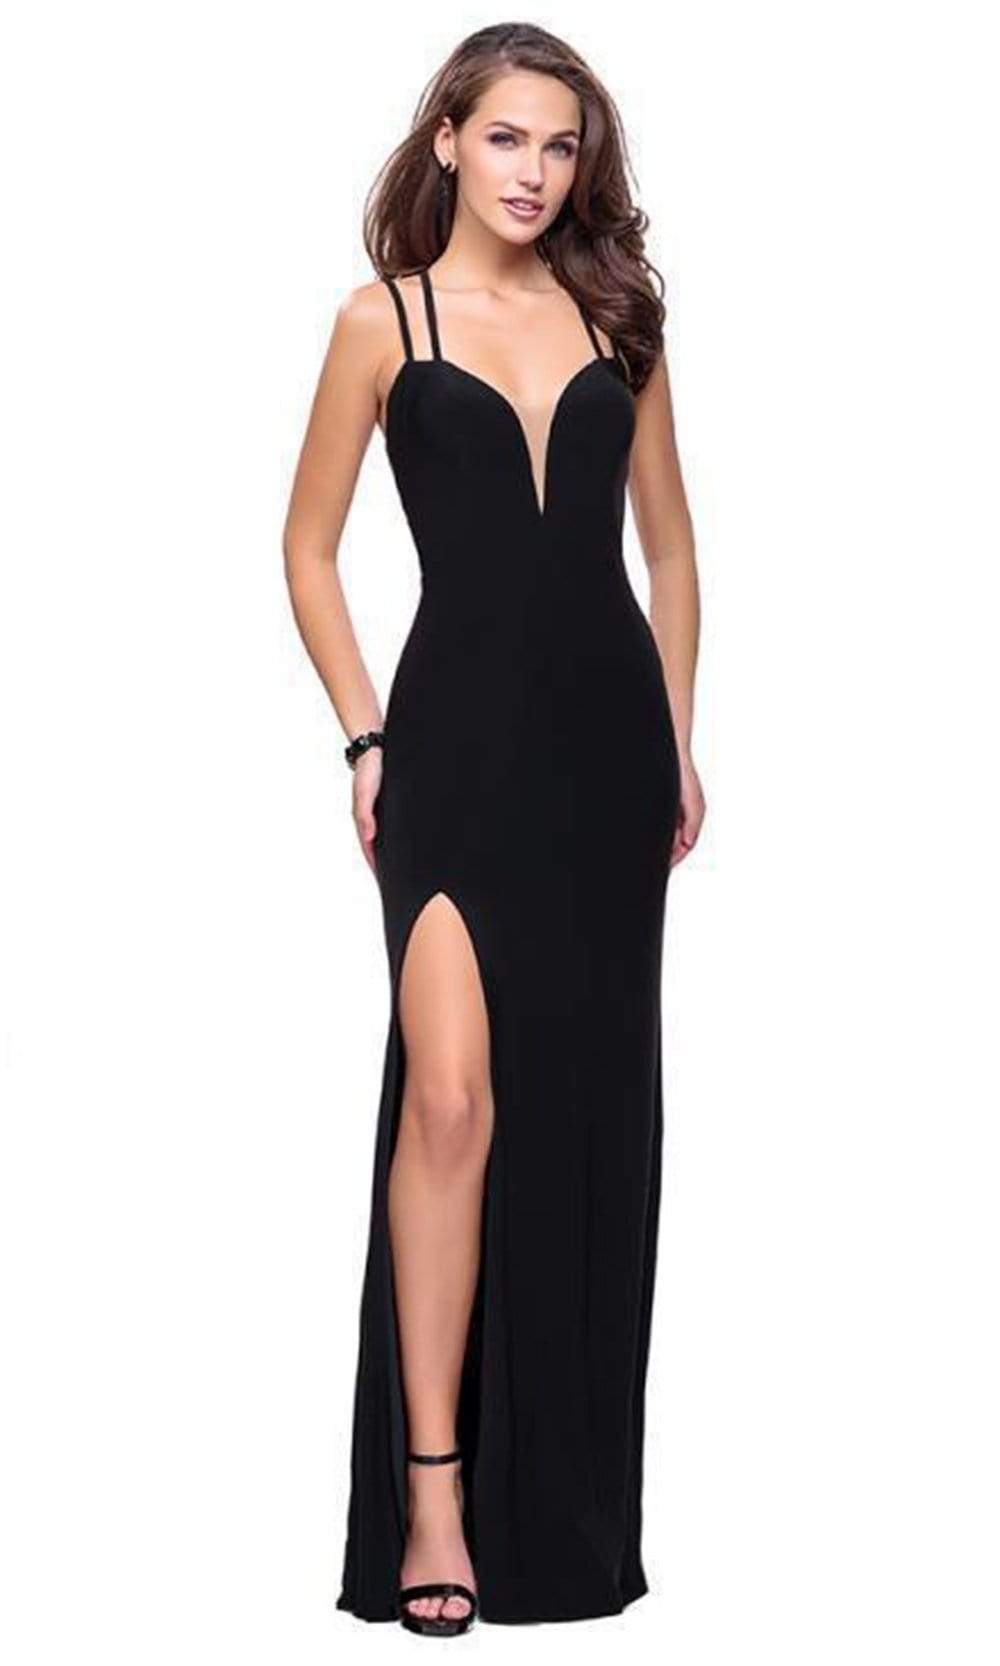 Image of La Femme - 25648 Plunging Sweetheart Crisscross Strapped Gown